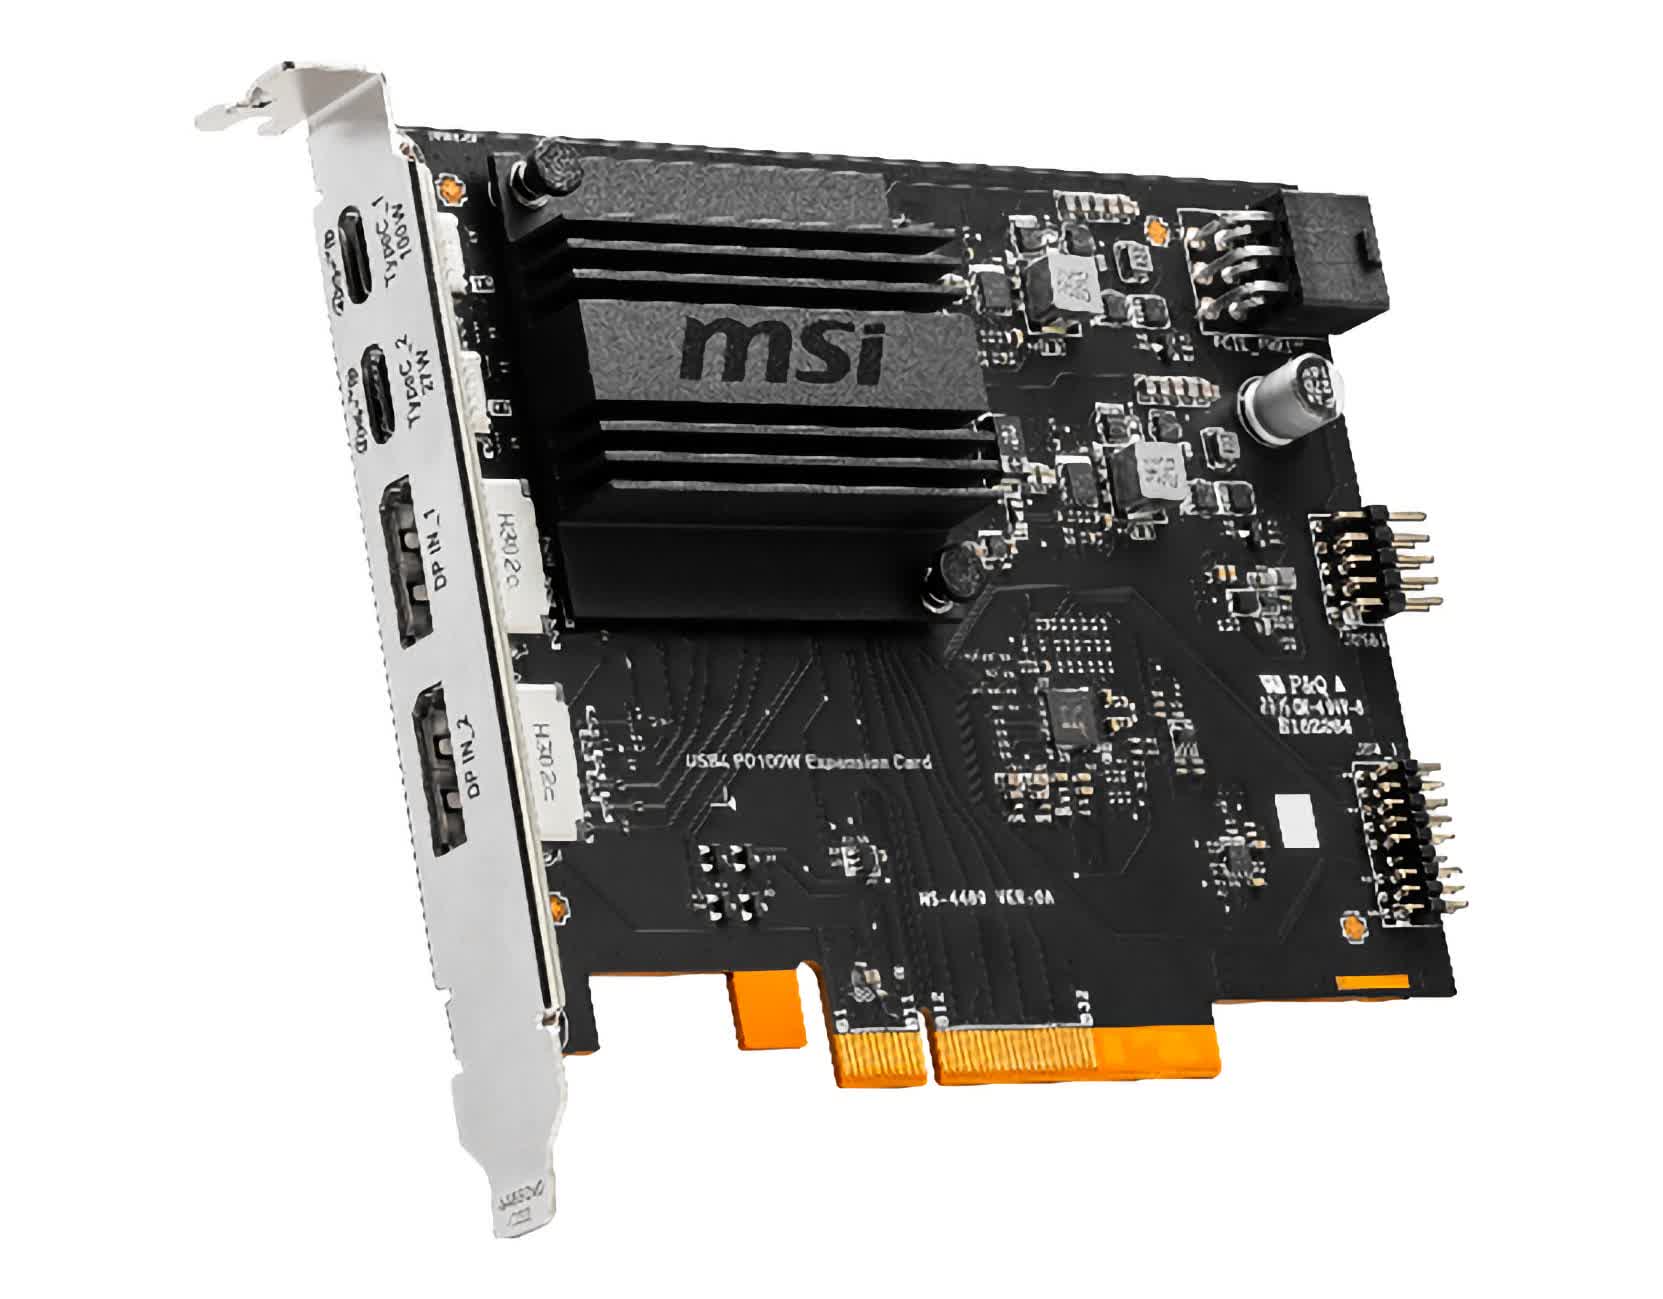 MSI reveals first USB4 growth card, delivering 100W by USB-C